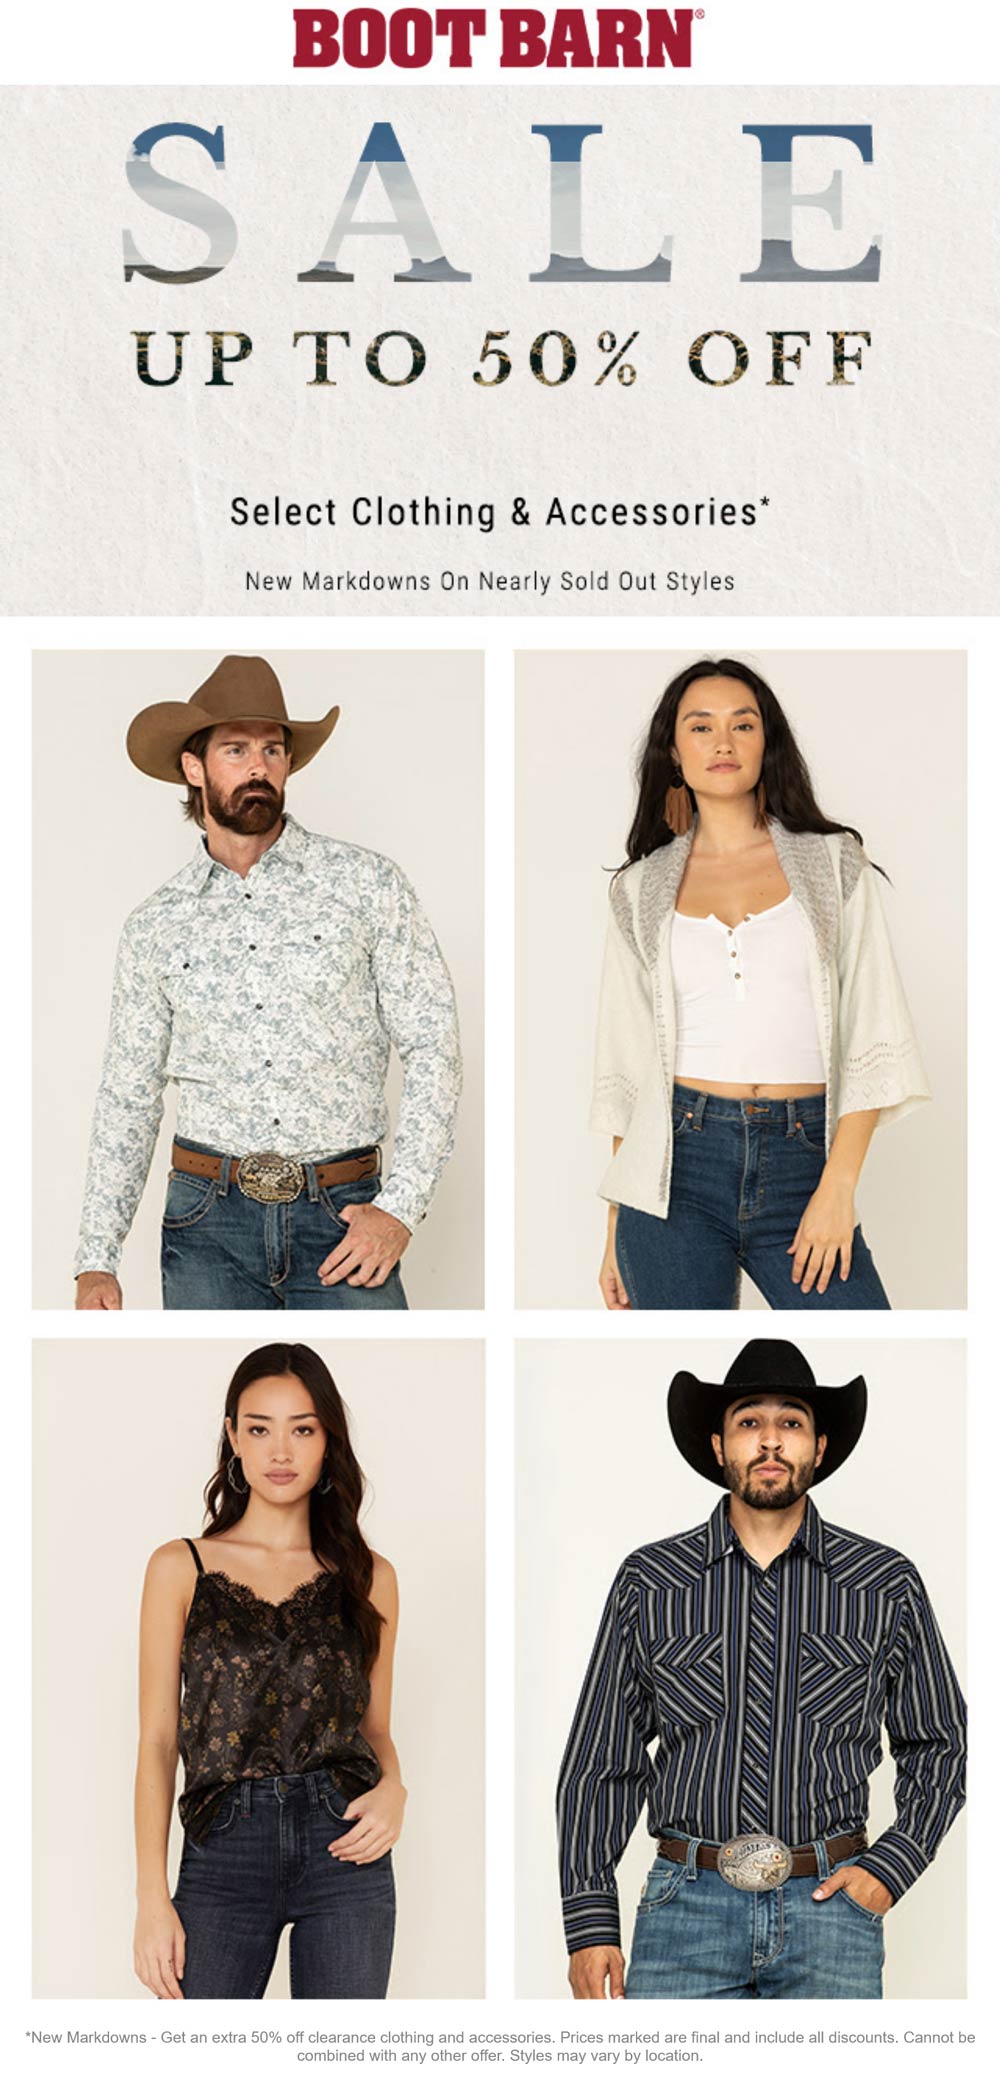 Boot Barn stores Coupon  Extra 50% off clearance clothing and accessories at Boot Barn, ditto online #bootbarn 